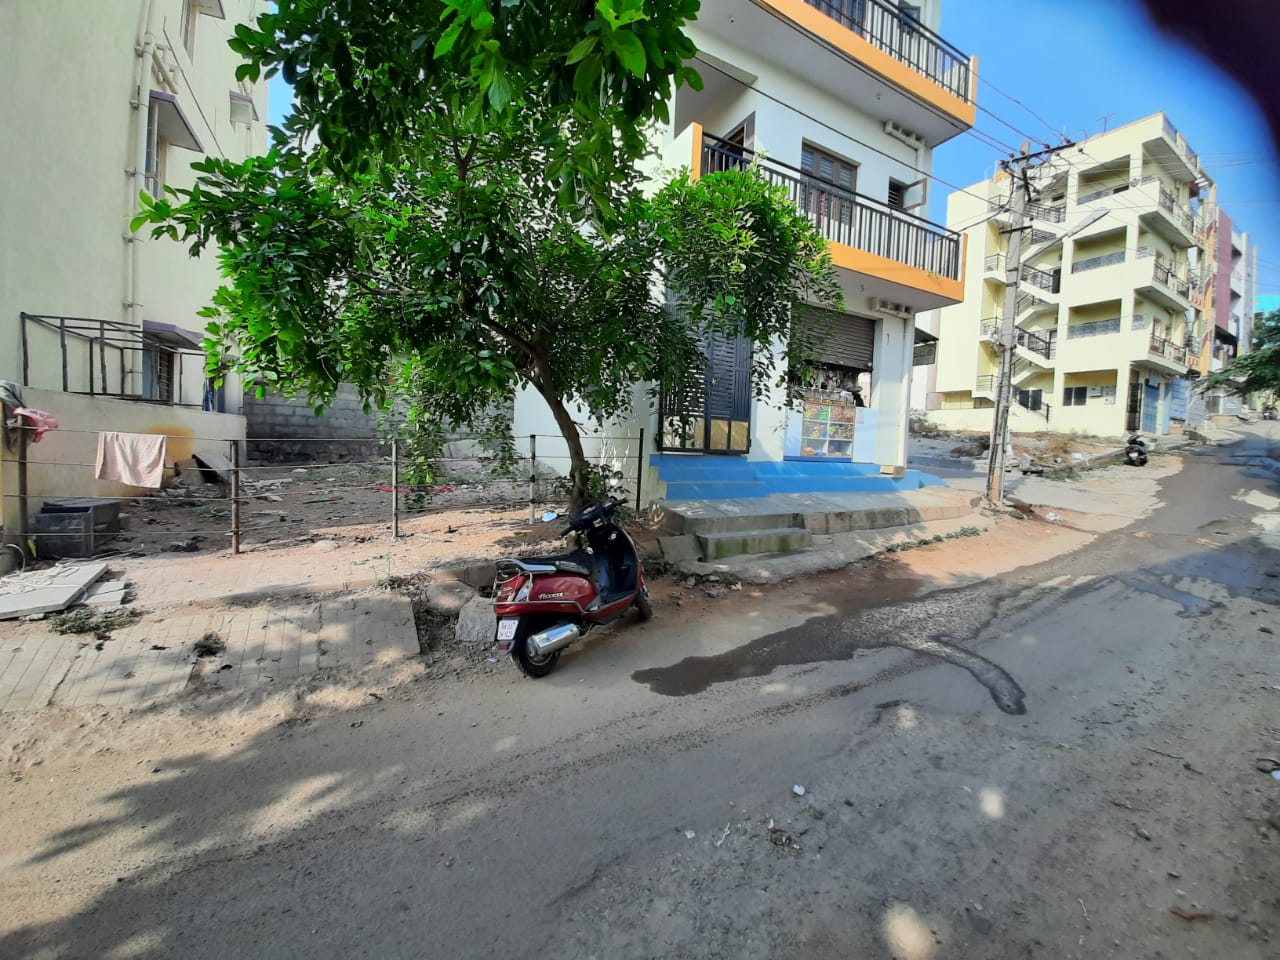 Independent Row House for Resale in Sunkadakatte